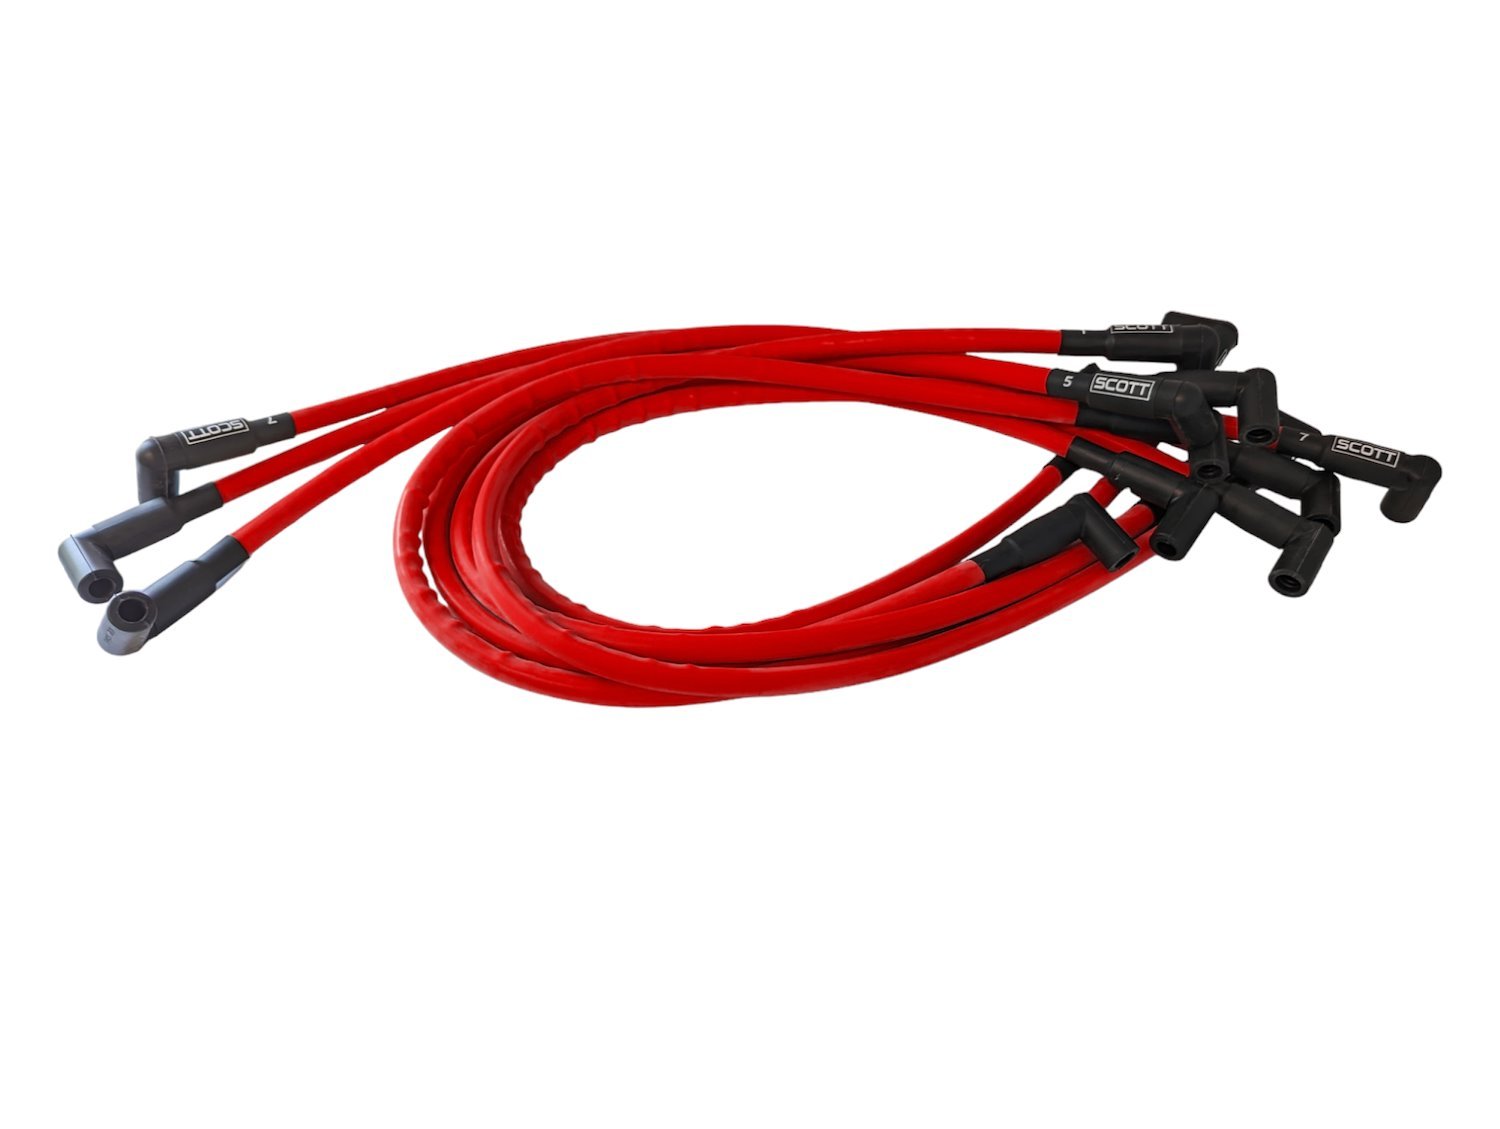 SPW300-CH-437-2 Super Mag Fiberglass-Oversleeved Spark Plug Wire Set for Small Block Chevy, Over & Under [Red]